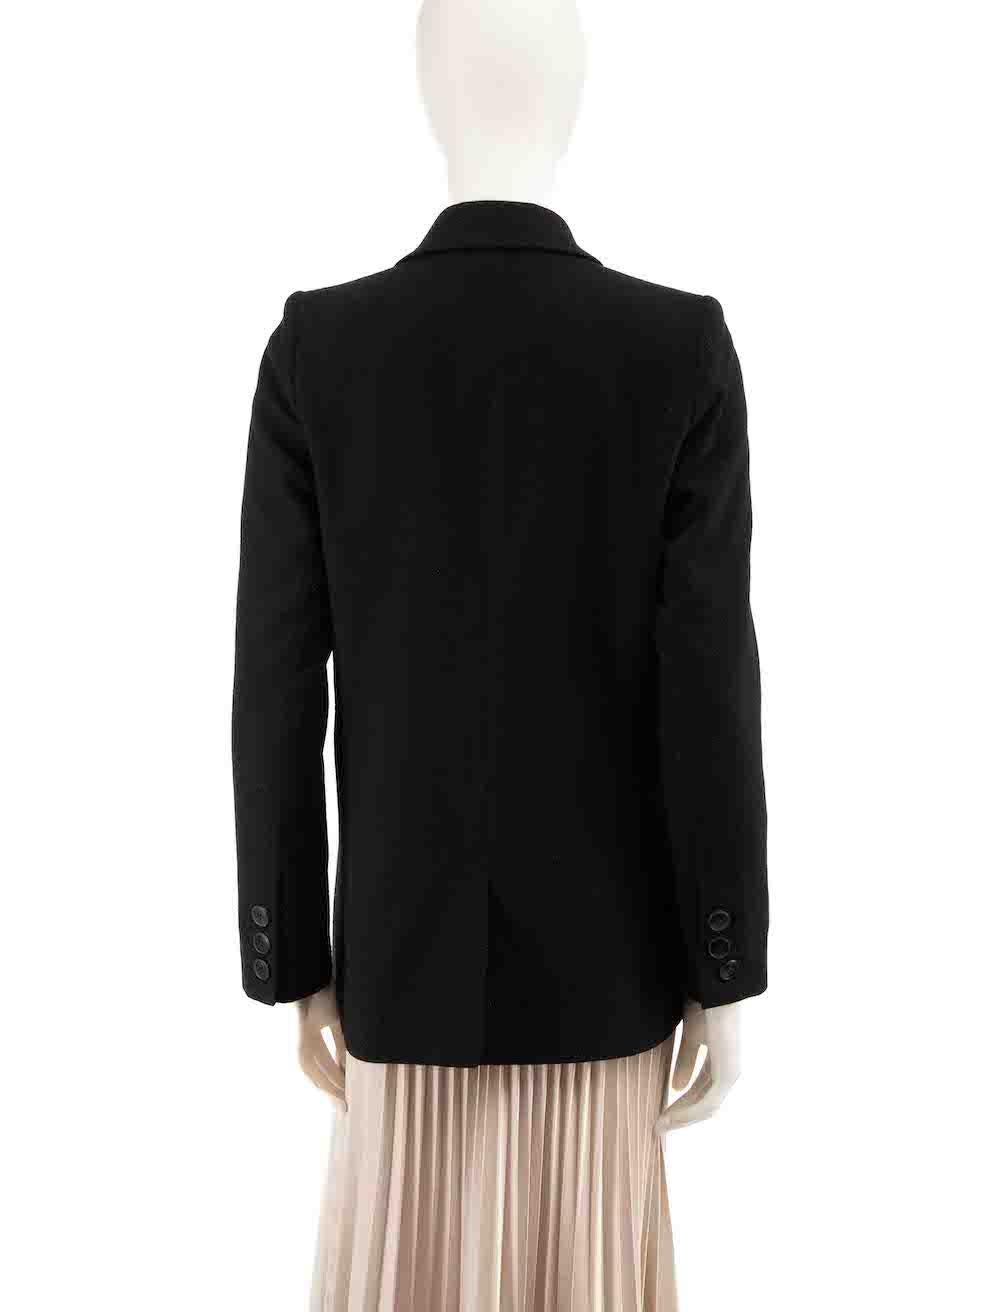 Anine Bing Black Shoulder Pad Blazer Size S In Good Condition For Sale In London, GB